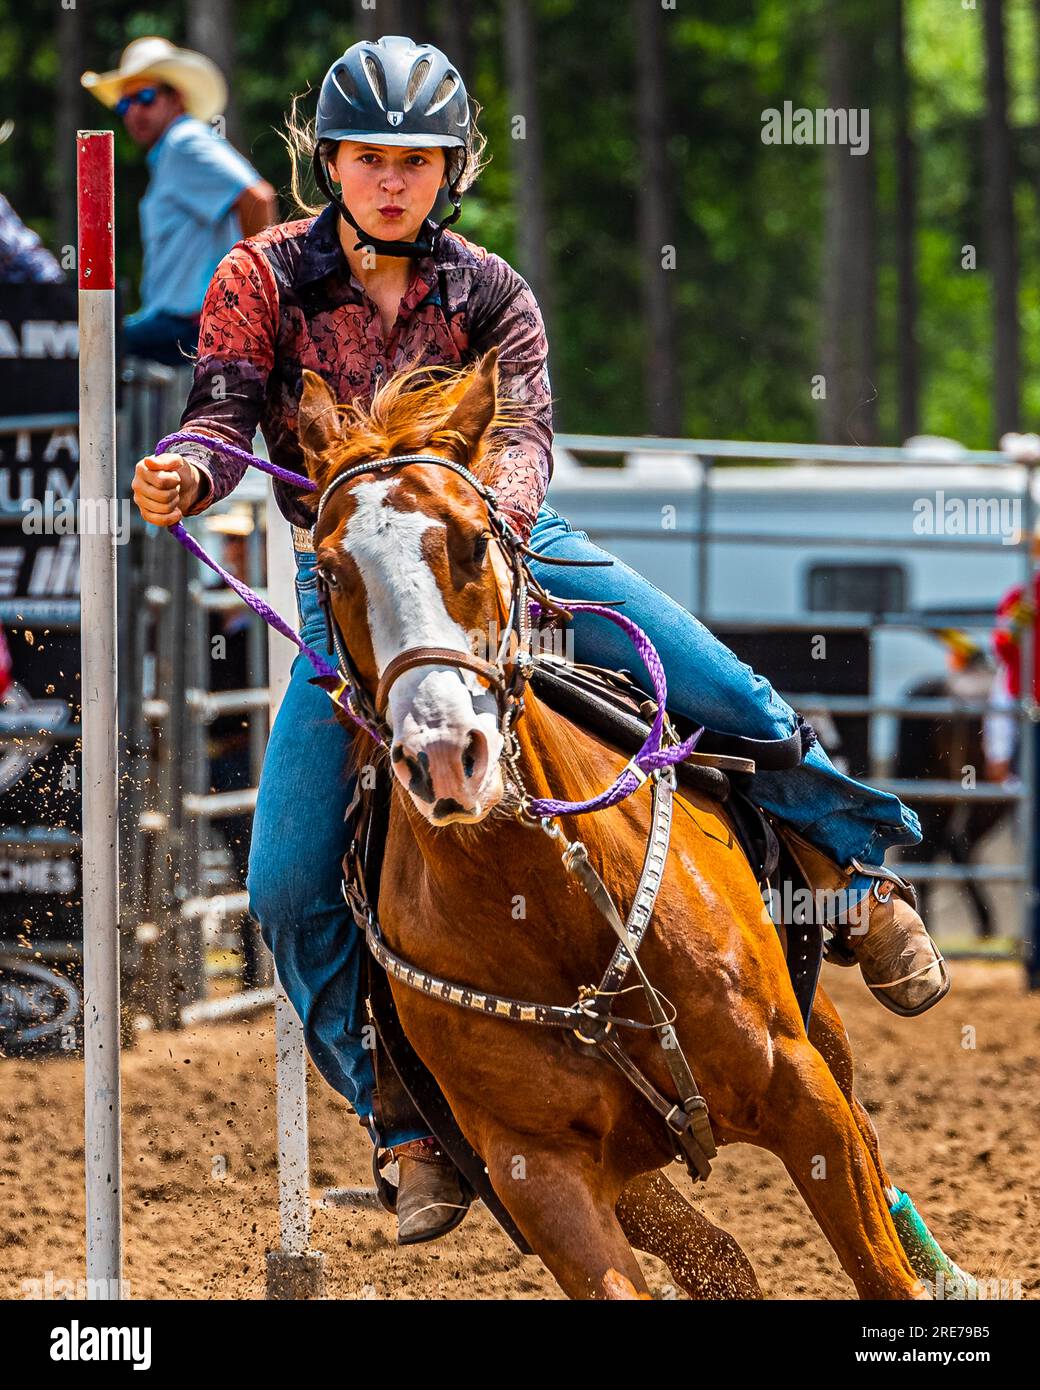 Canada Rodeo. ERIN ONTARIO RAM RODEO - on July 22-23 in Erin, Ontario, a rodeo type competition took place. Riding horses and bulls. Horse slalom. Stock Photo